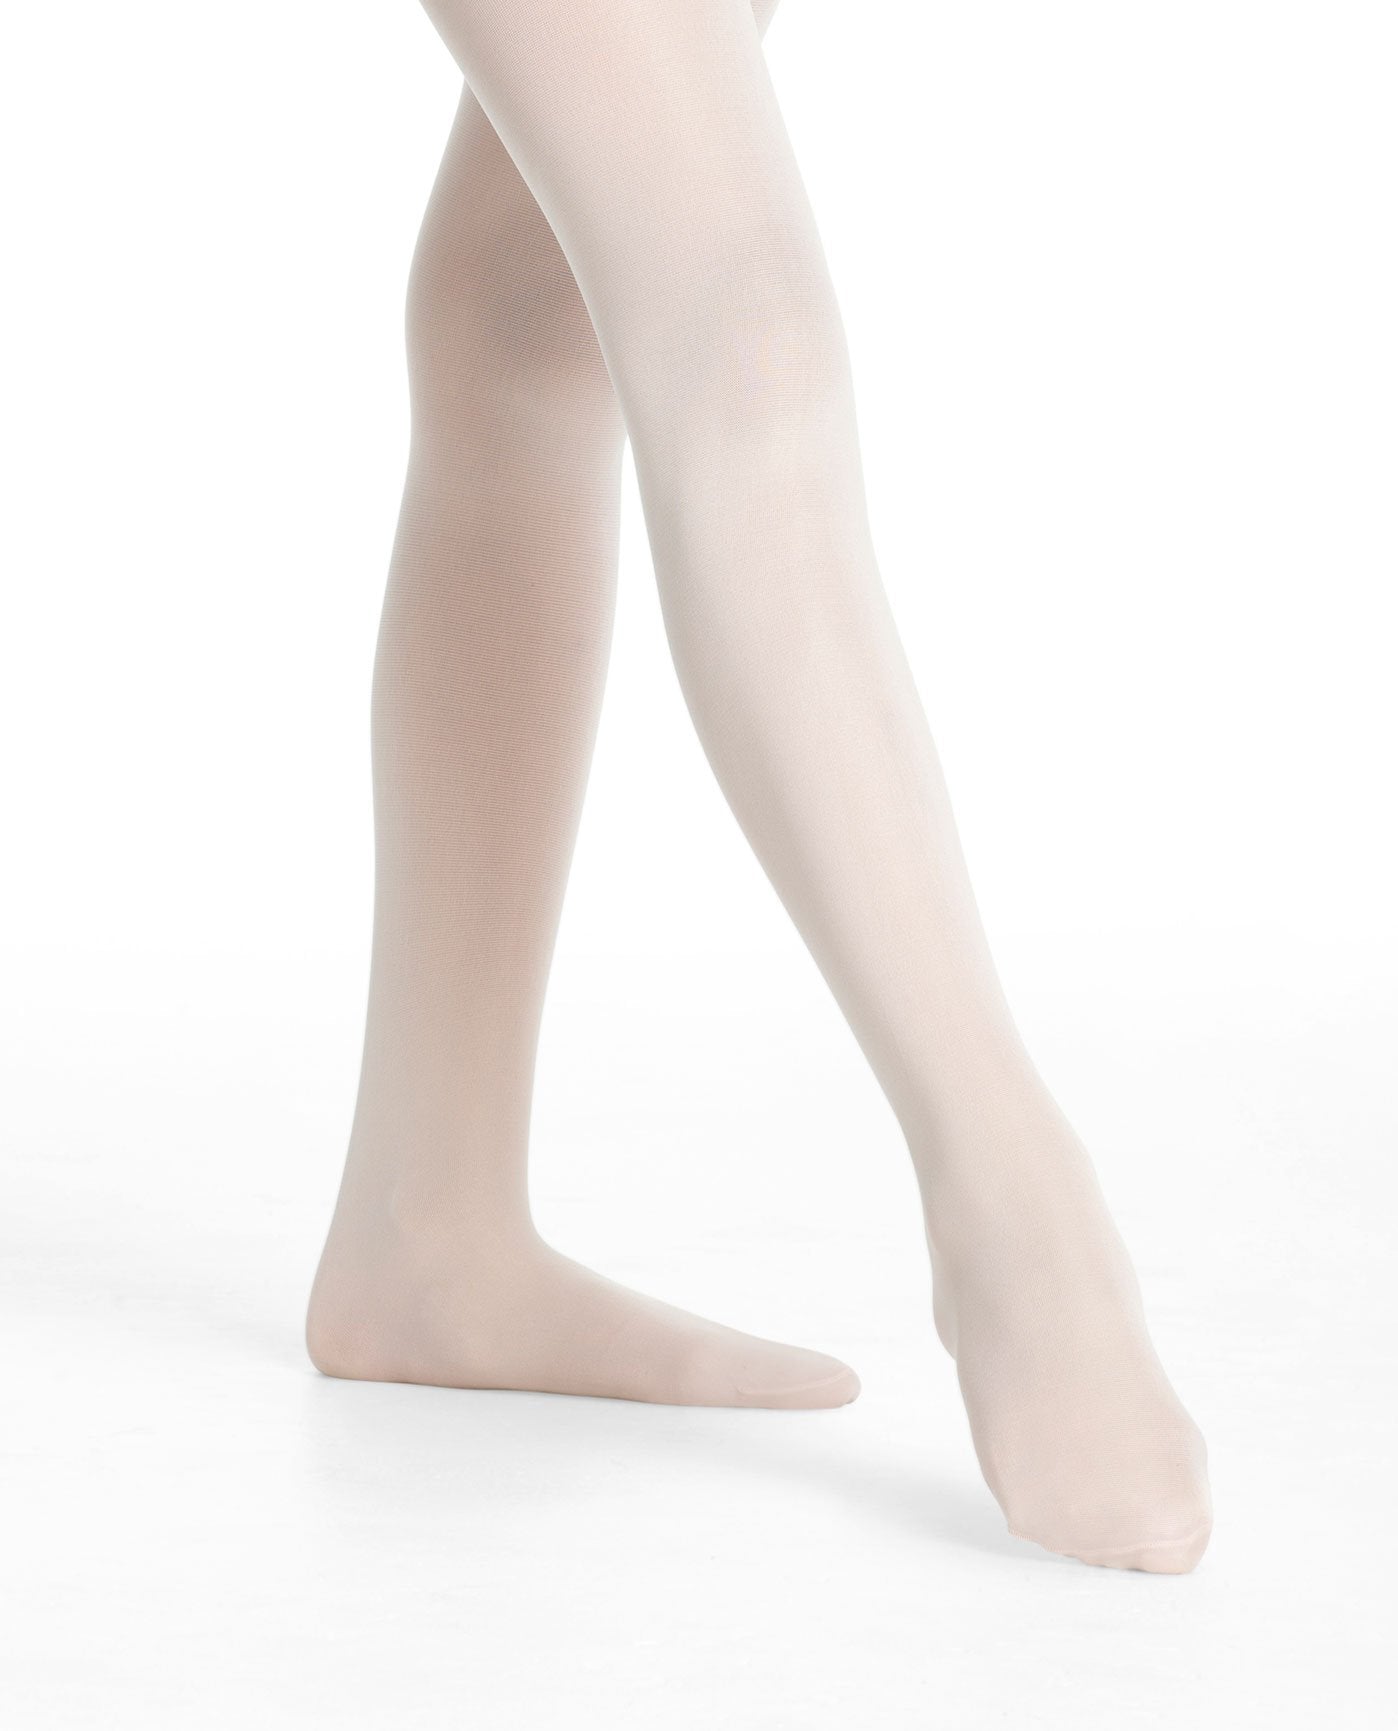 BRAND NEW GIRL SIZE 7-10 DANSKIN NOW FOOTED DANCE TIGHTS FITS 55